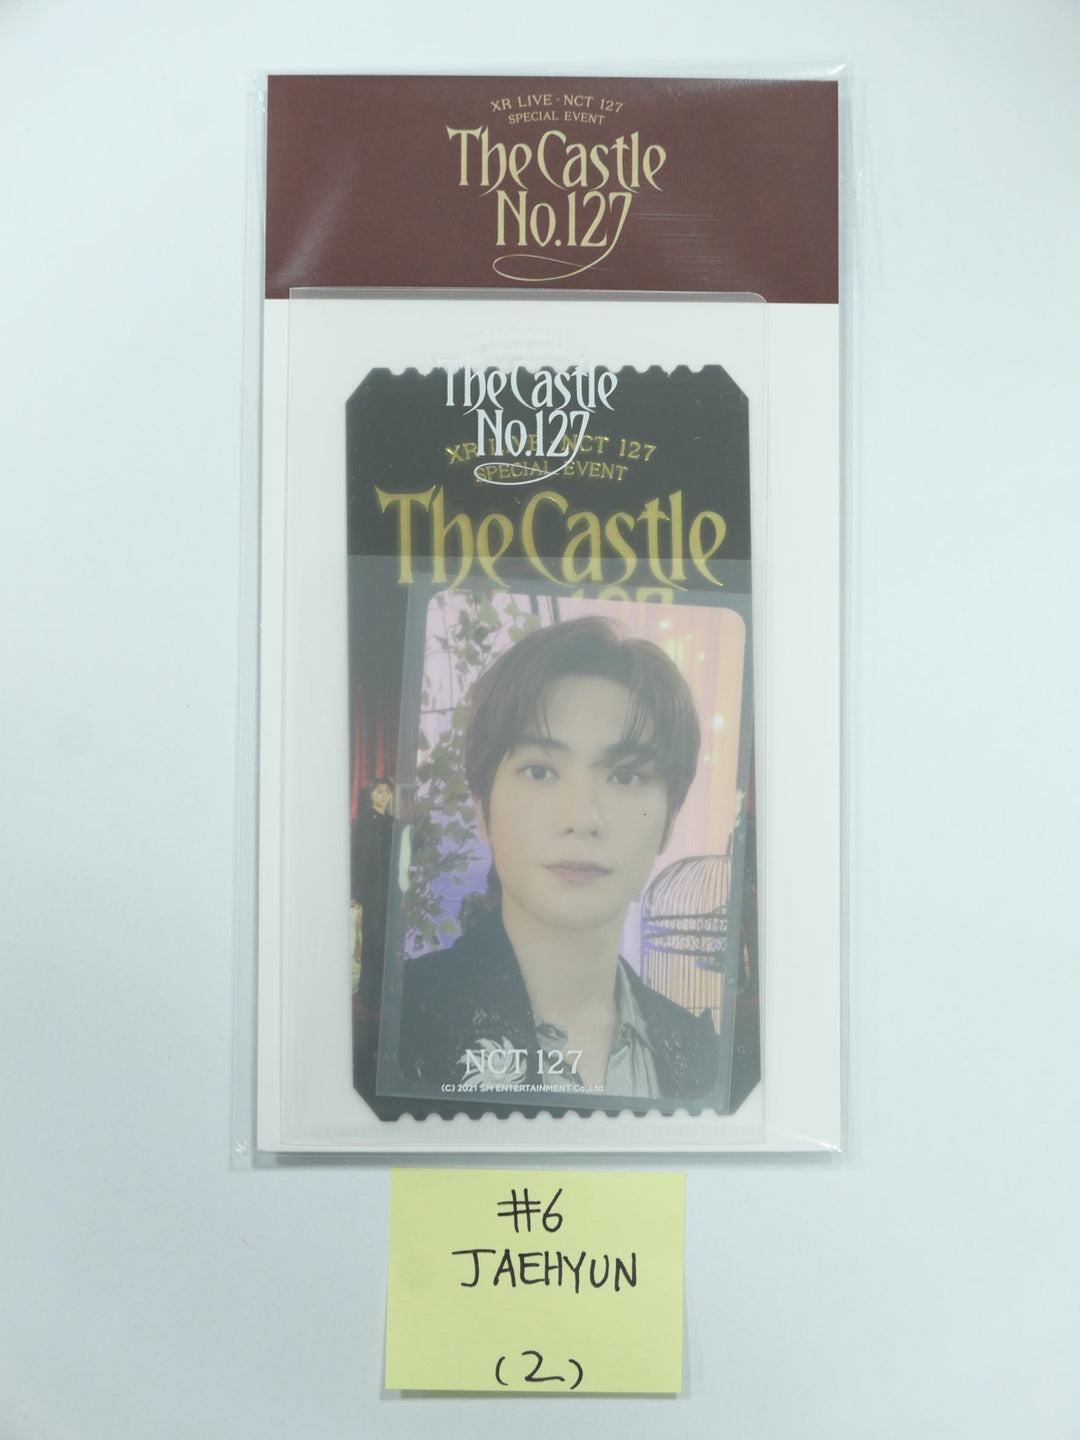 NCT - SMTOWN Special AR Ticket & Photocard